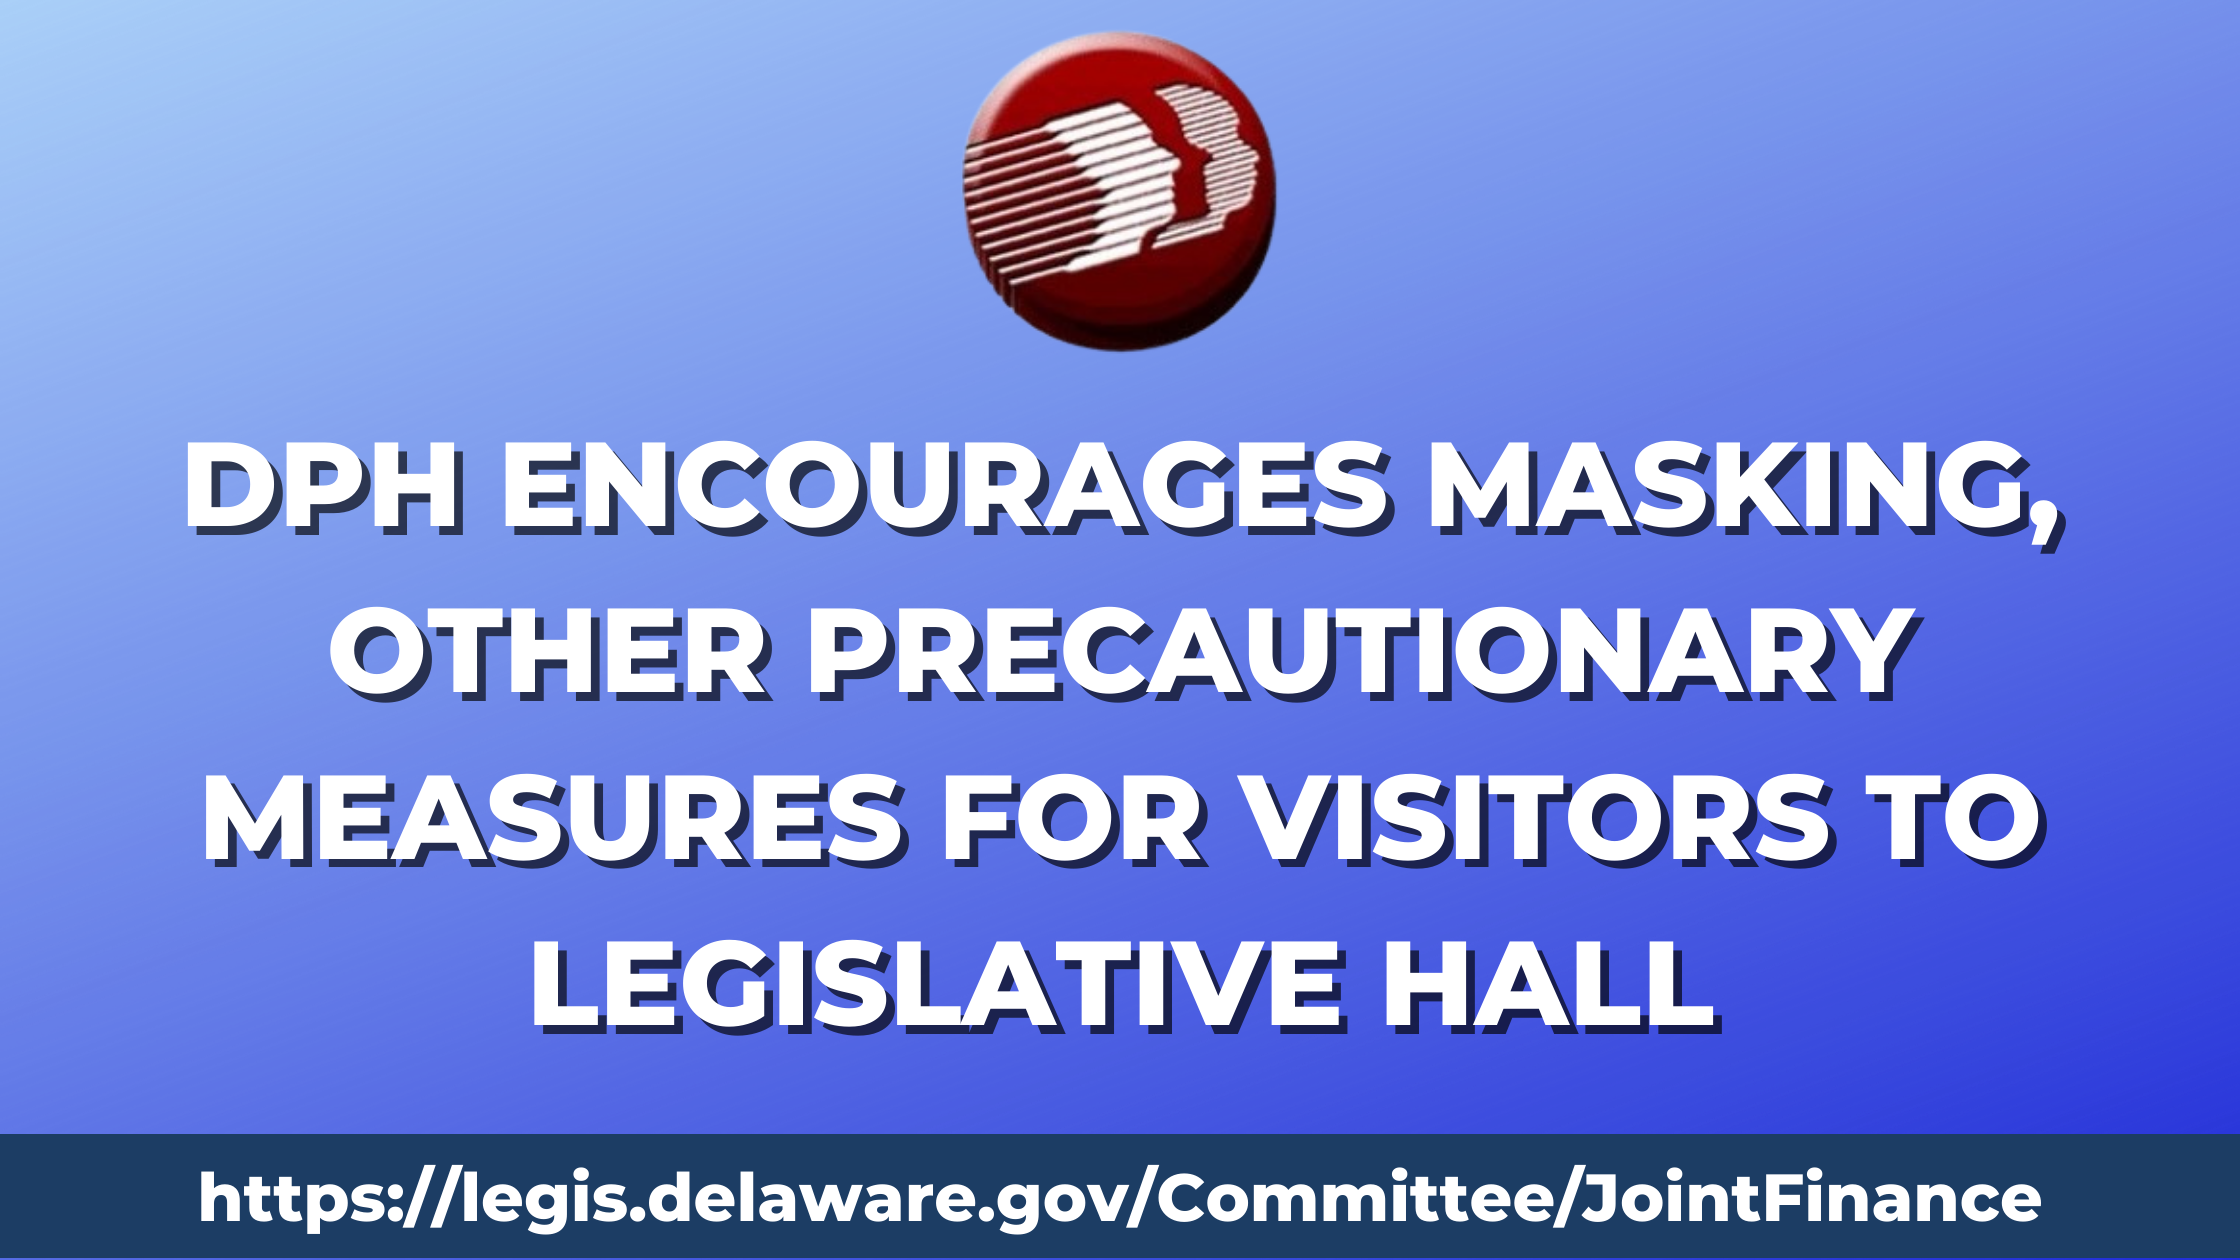 DPH Encourages Masking, Other Precautionary Measures For Visitors To Legislative Hall